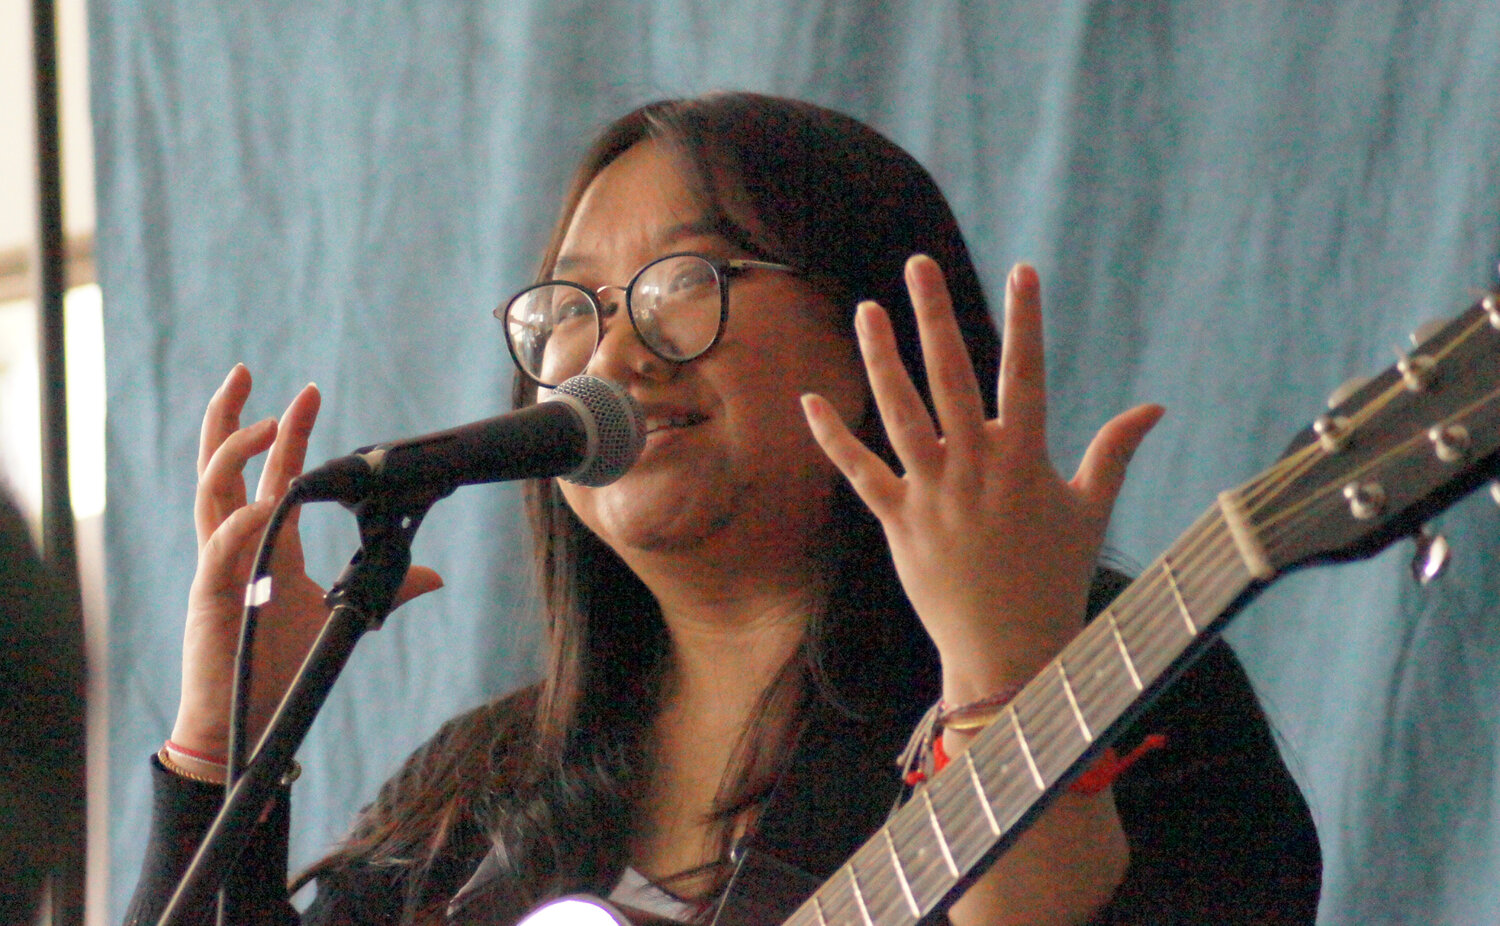 Alicia Thao helps host a recent open-mic night at In Progress. Last year’s events featured just local performers. This year, vendors are a part of the evening in an effort to support local businesses, as well as artists.